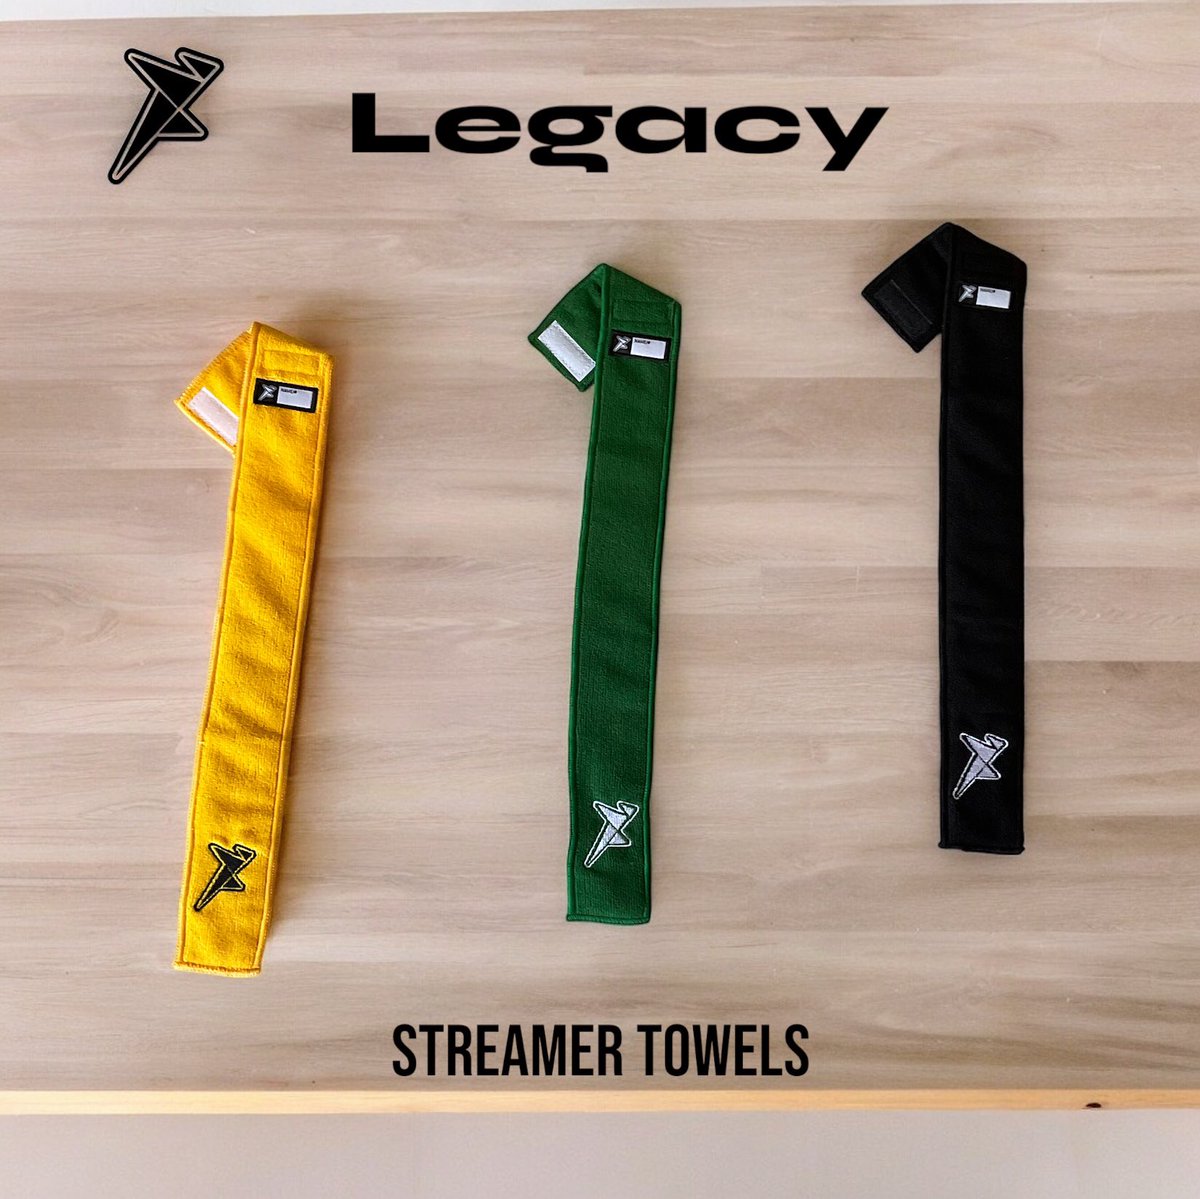 Streamer Towels available online

10 different colors

Get your drip 💧 read for spring ball

#footballgame #footballplayer #viral #athletes #sports #footballfans #footballgear